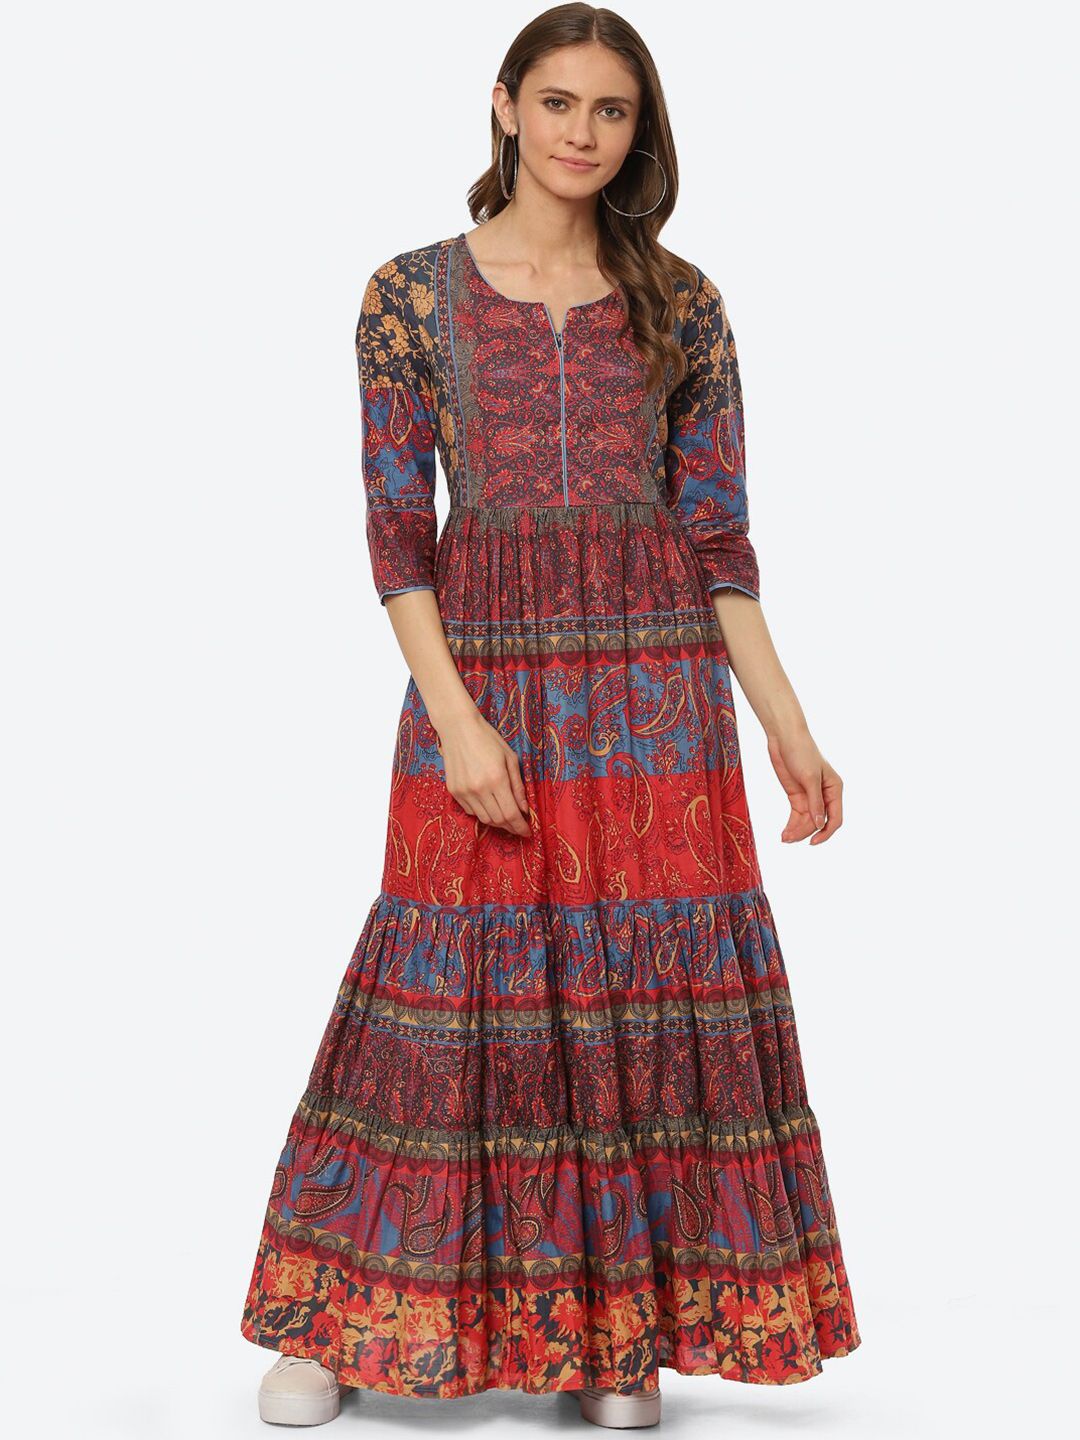 Biba Women Red & Blue Ethnic Motifs Printed Cotton A-Line Ethnic Dress Price in India